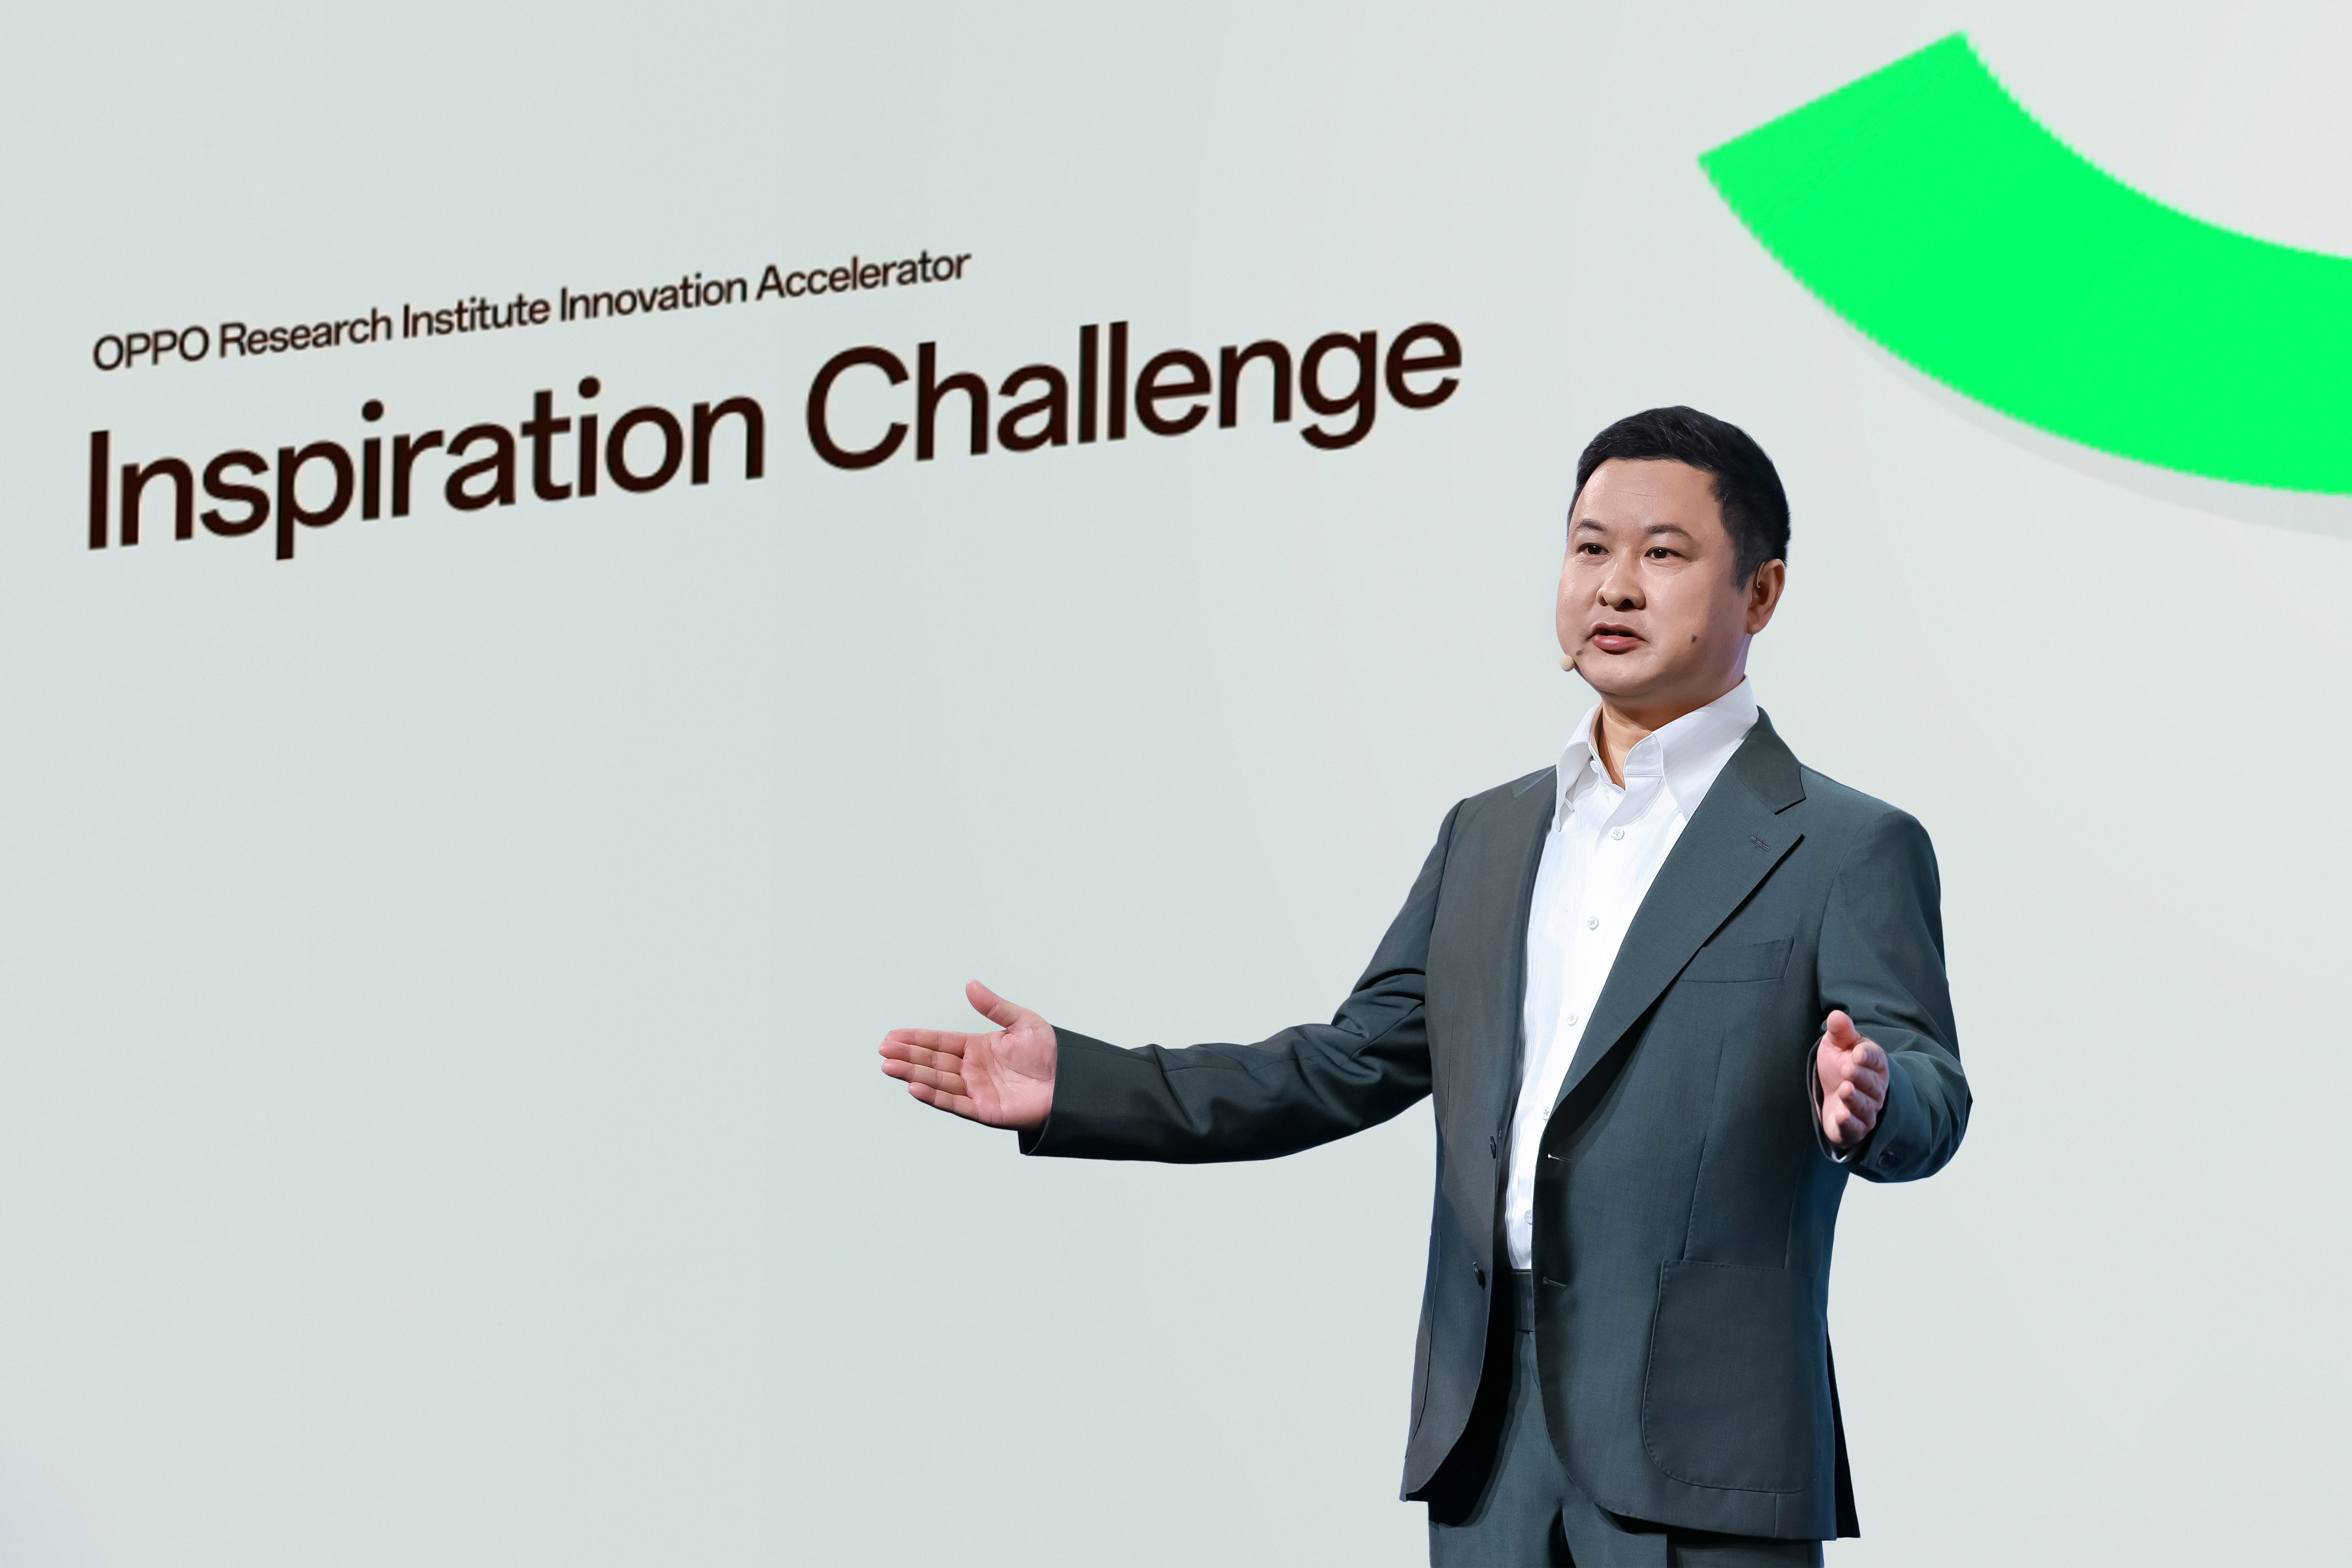 President of the OPPO Research Institute, Jasion Liao, delivers the opening remark at the Global Final Demo Event